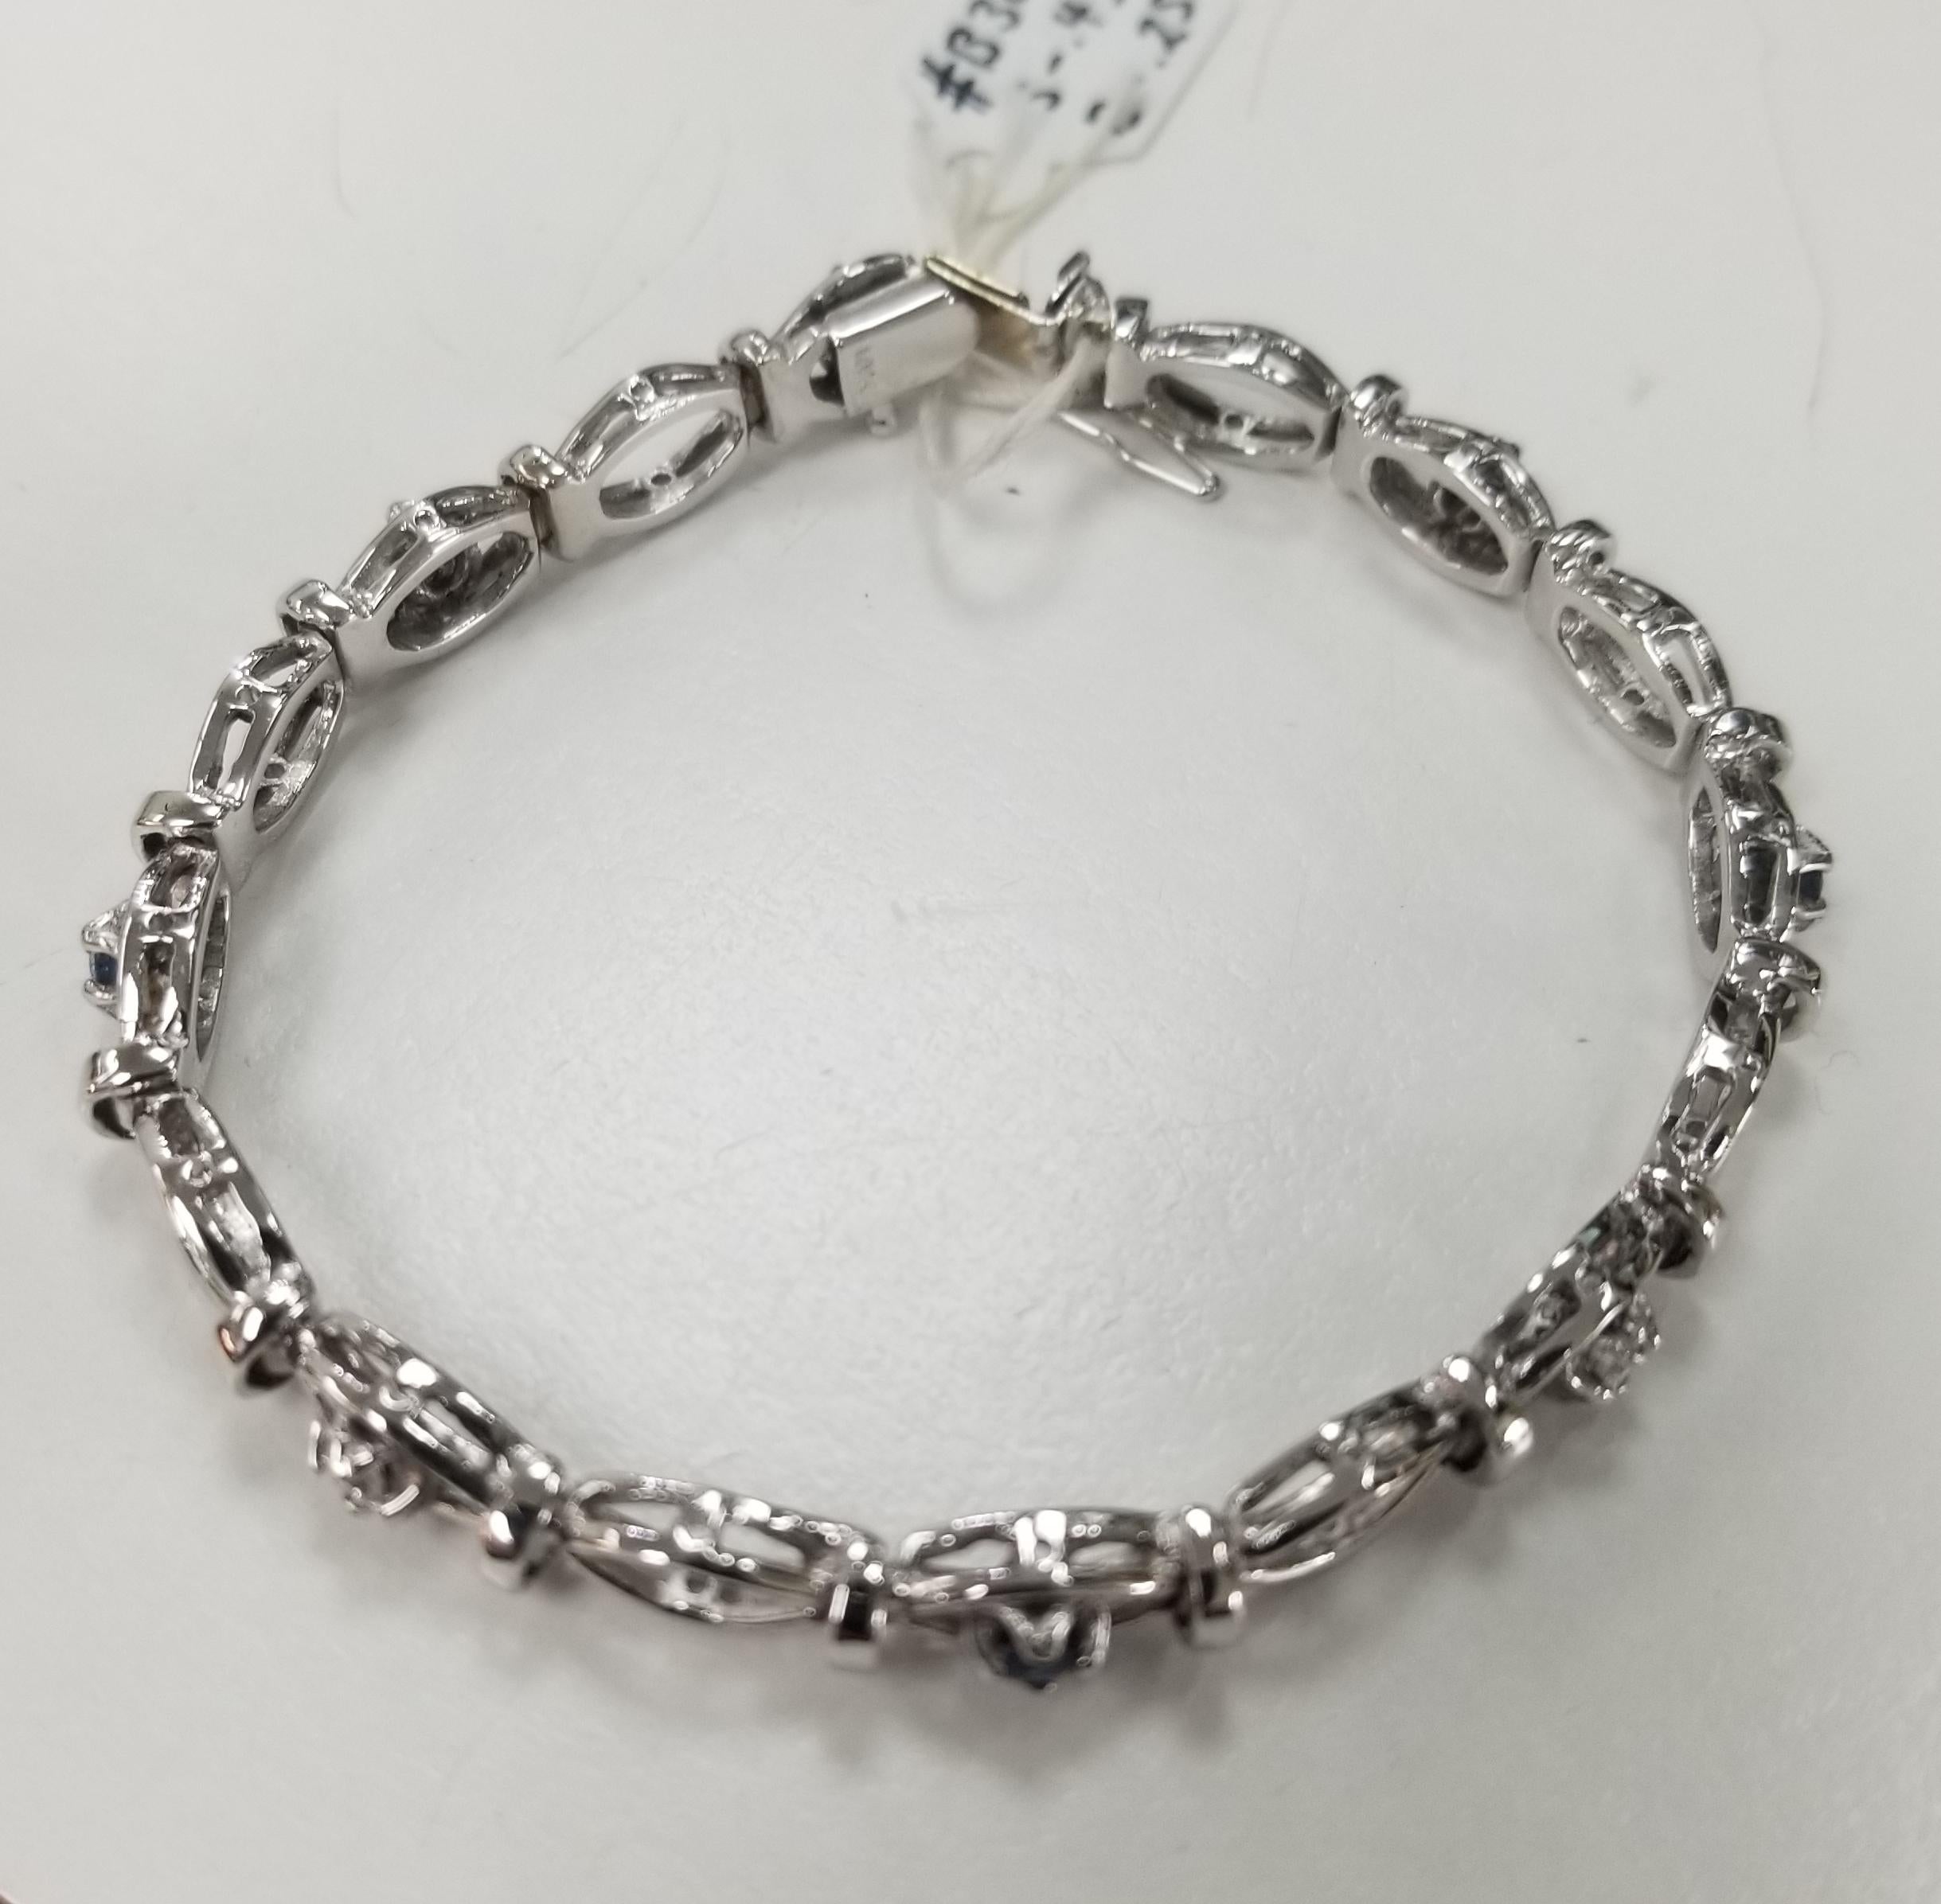 14k white gold sapphire and diamond bracelet, containing 4 round sapphires of gem quality weighing .43pts. and 4 round full cut diamonds; color 